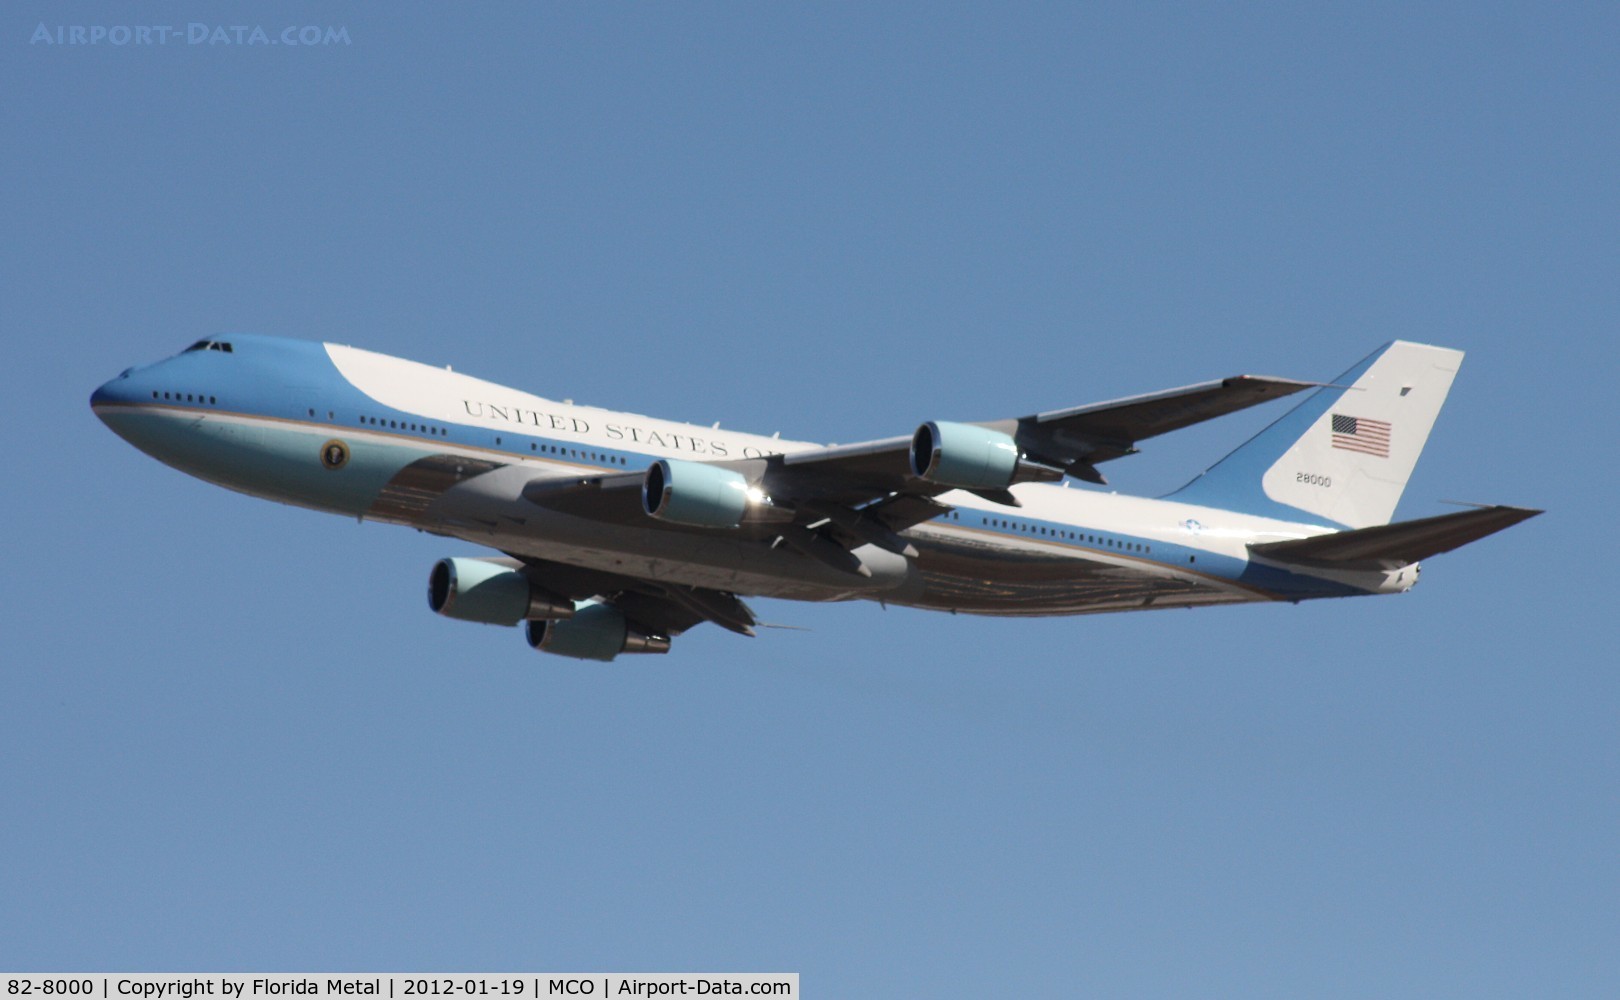 82-8000, 1987 Boeing VC-25A (747-2G4B) C/N 23824, Air Force One departing